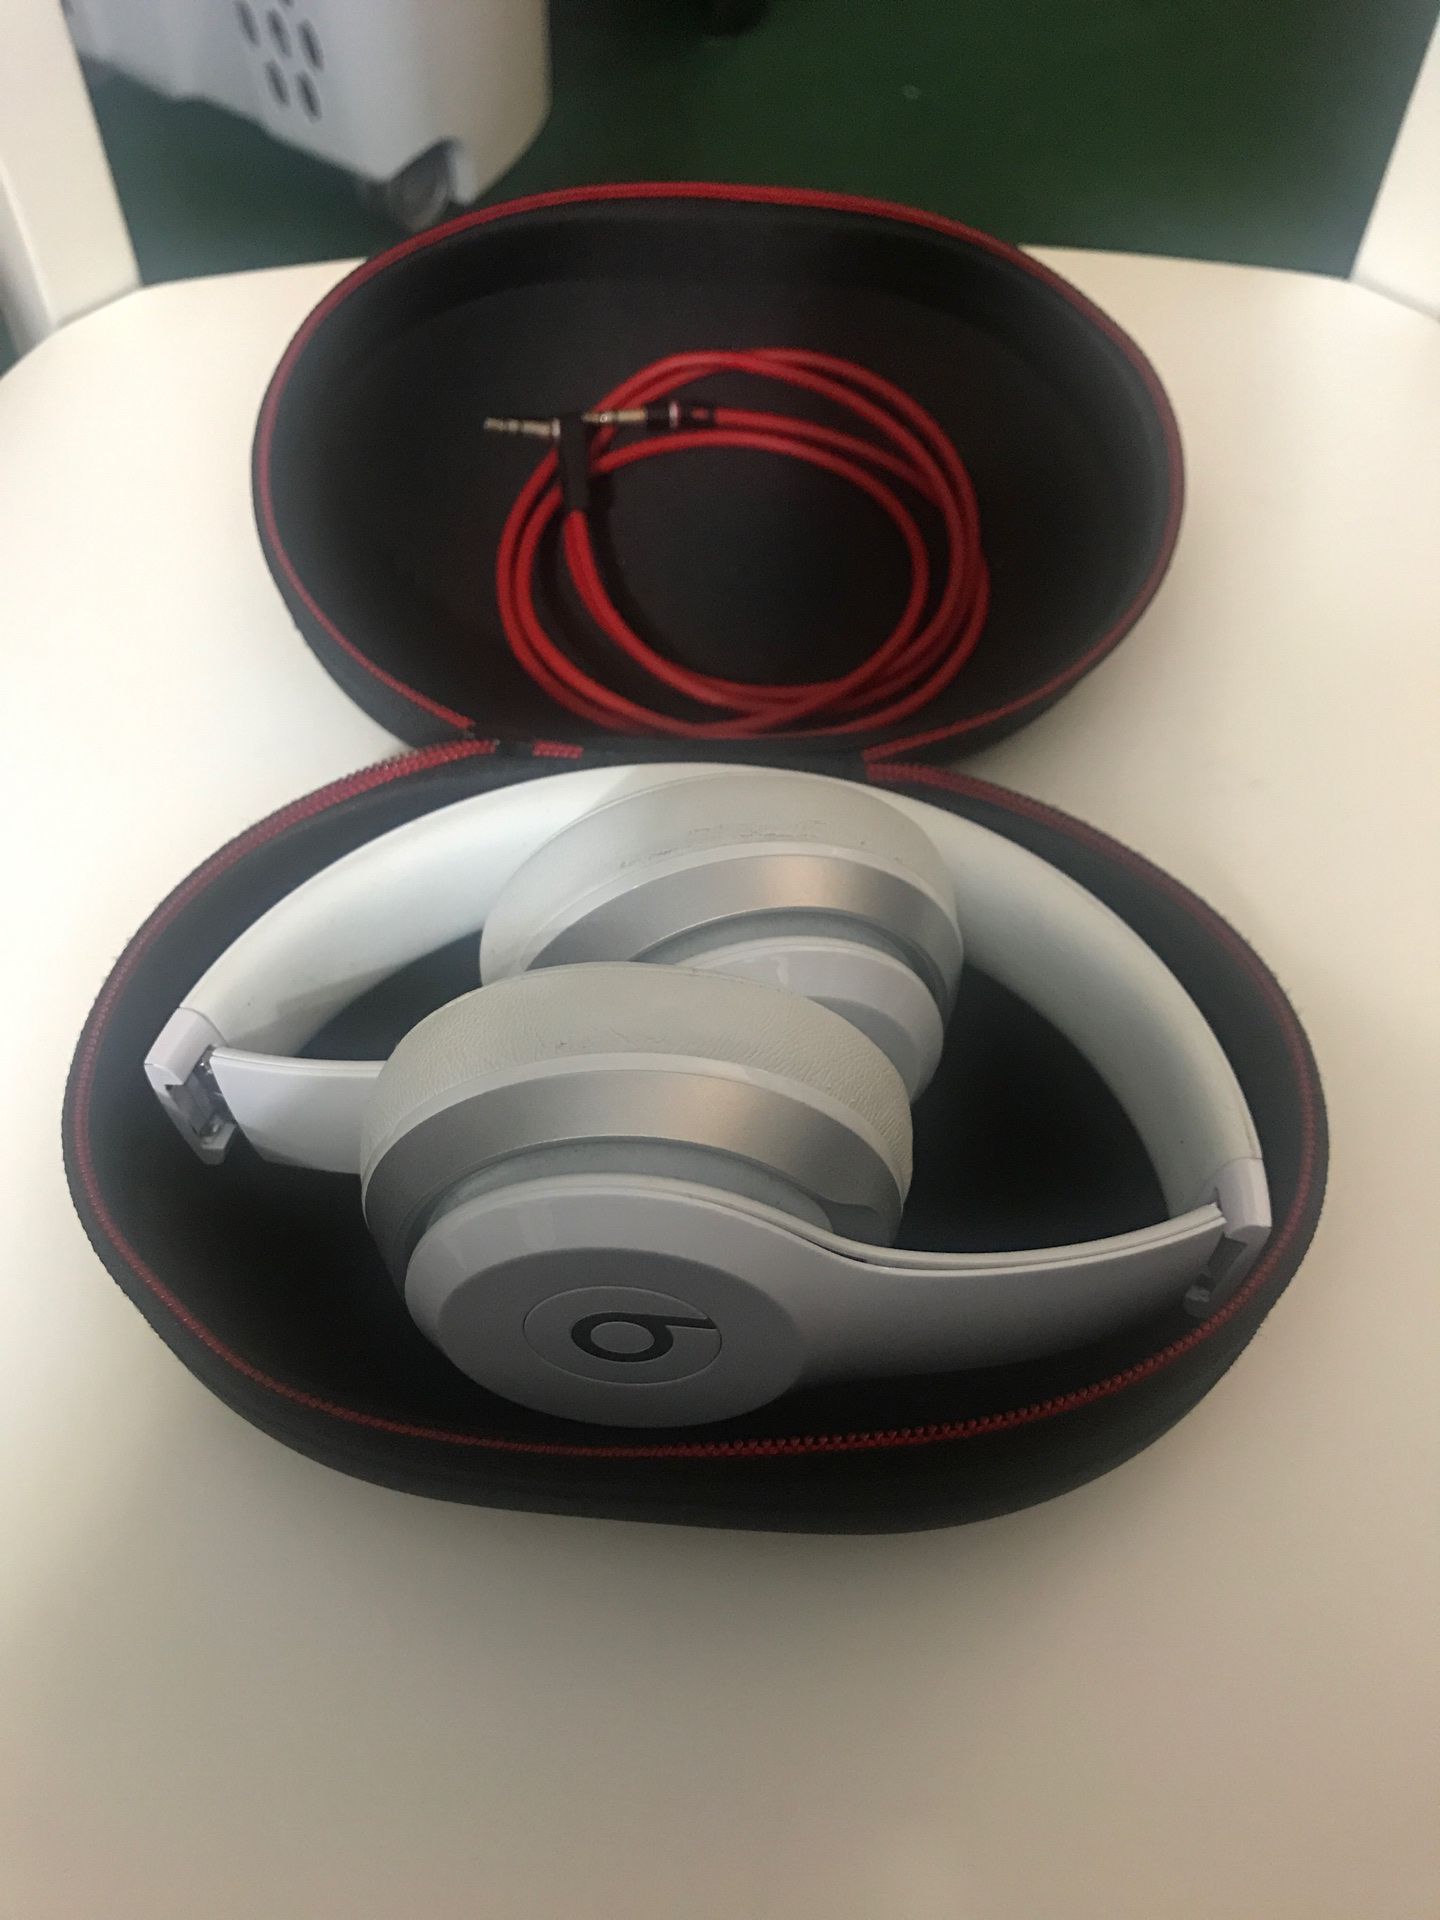 Beats by Dre solo 2nd generation wired